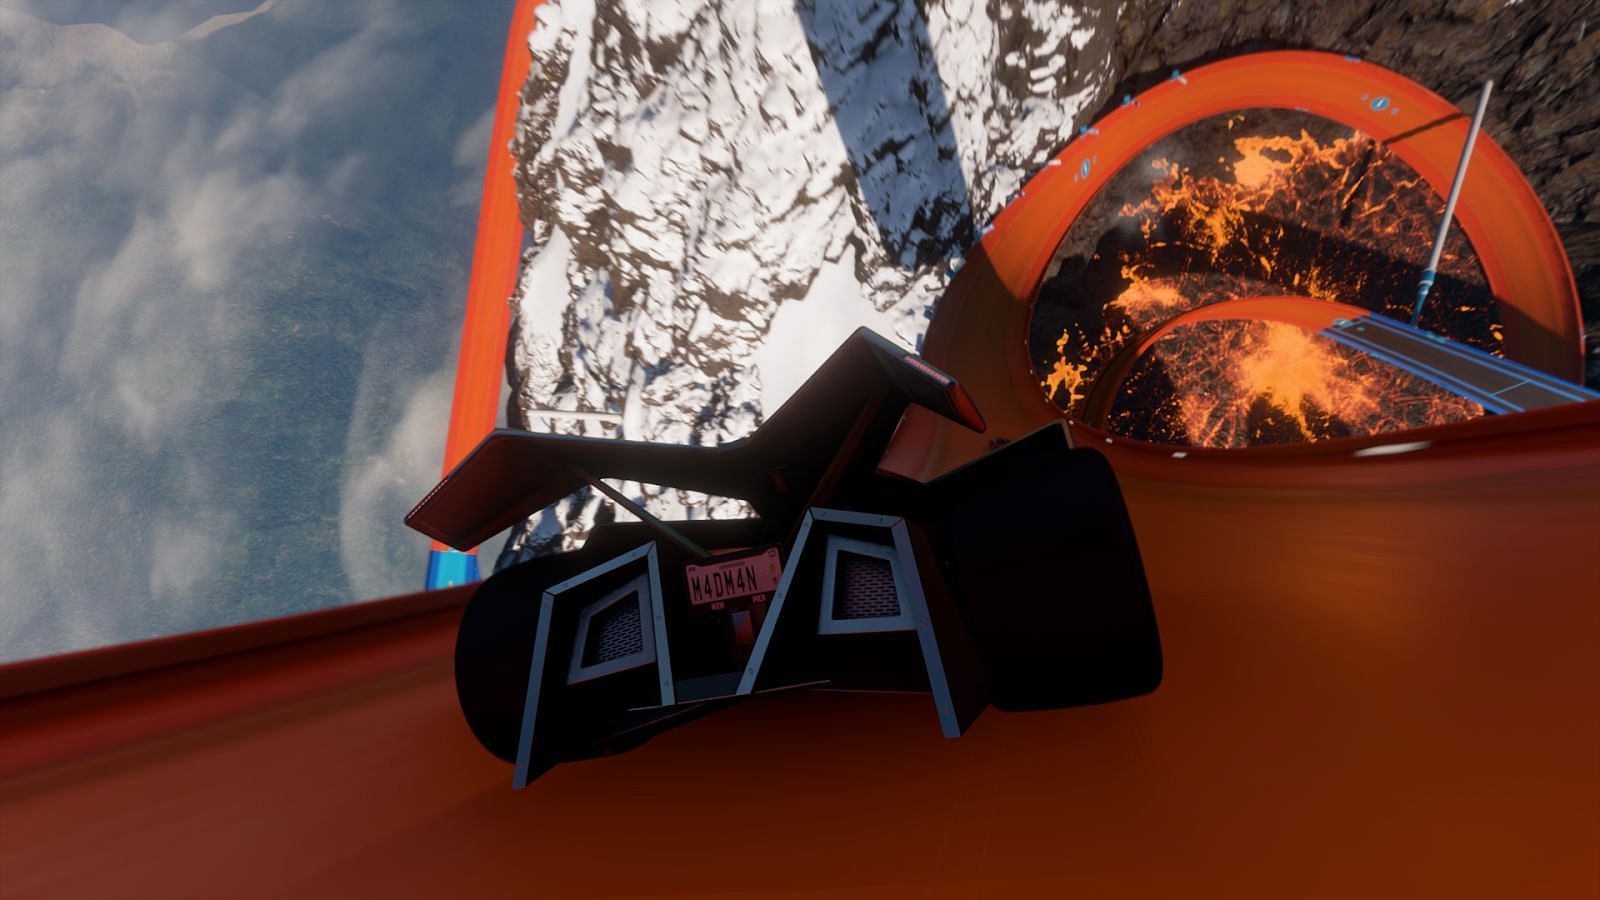 Rollercoaster vibe check, this sure looks scary but a fun thing to do (Image via Forza Horizon 5 Hot Wheels)